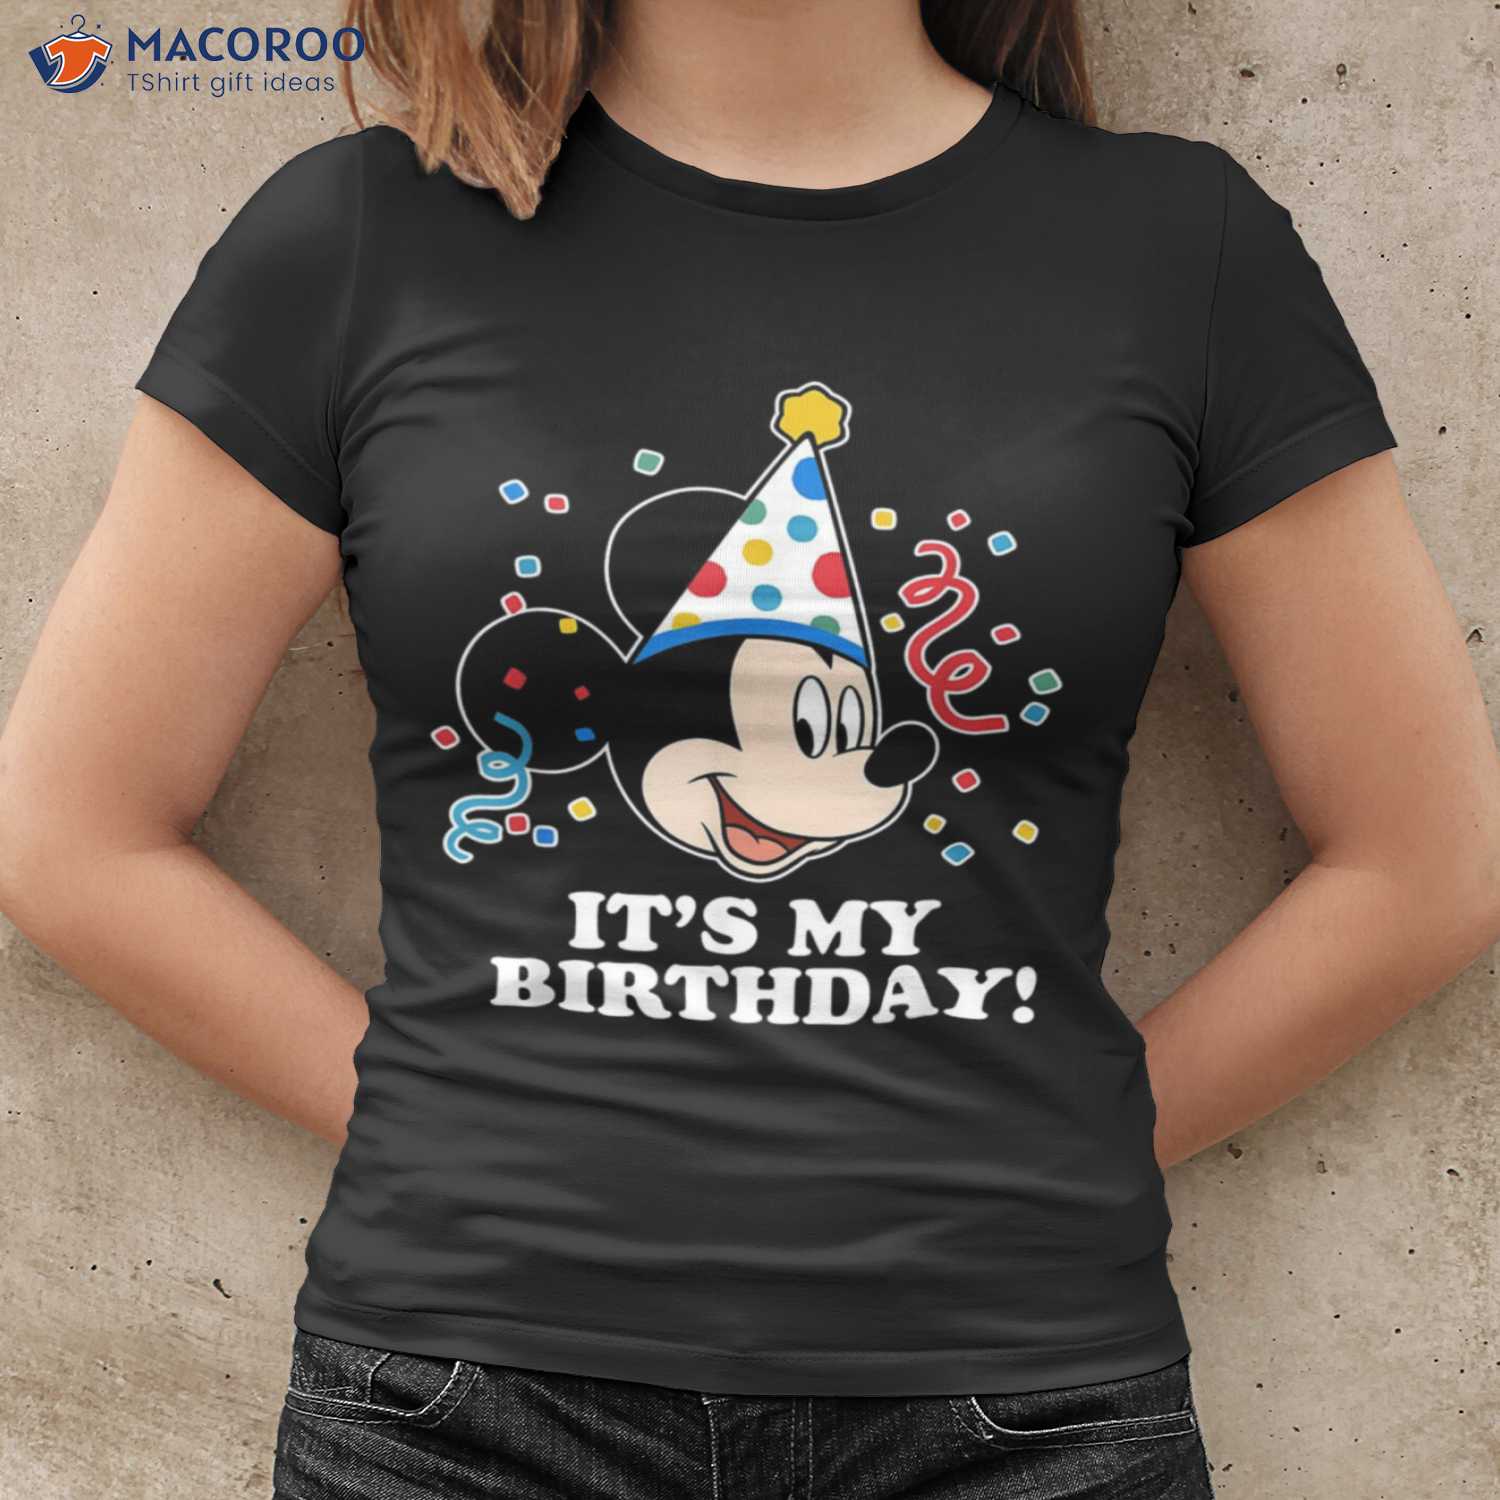 https://images.macoroo.com/wp-content/uploads/2023/03/disney-mickey-mouse-its-my-birthday-t-shirt-best-birthday-gifts-for-your-mom-women-cool.jpg